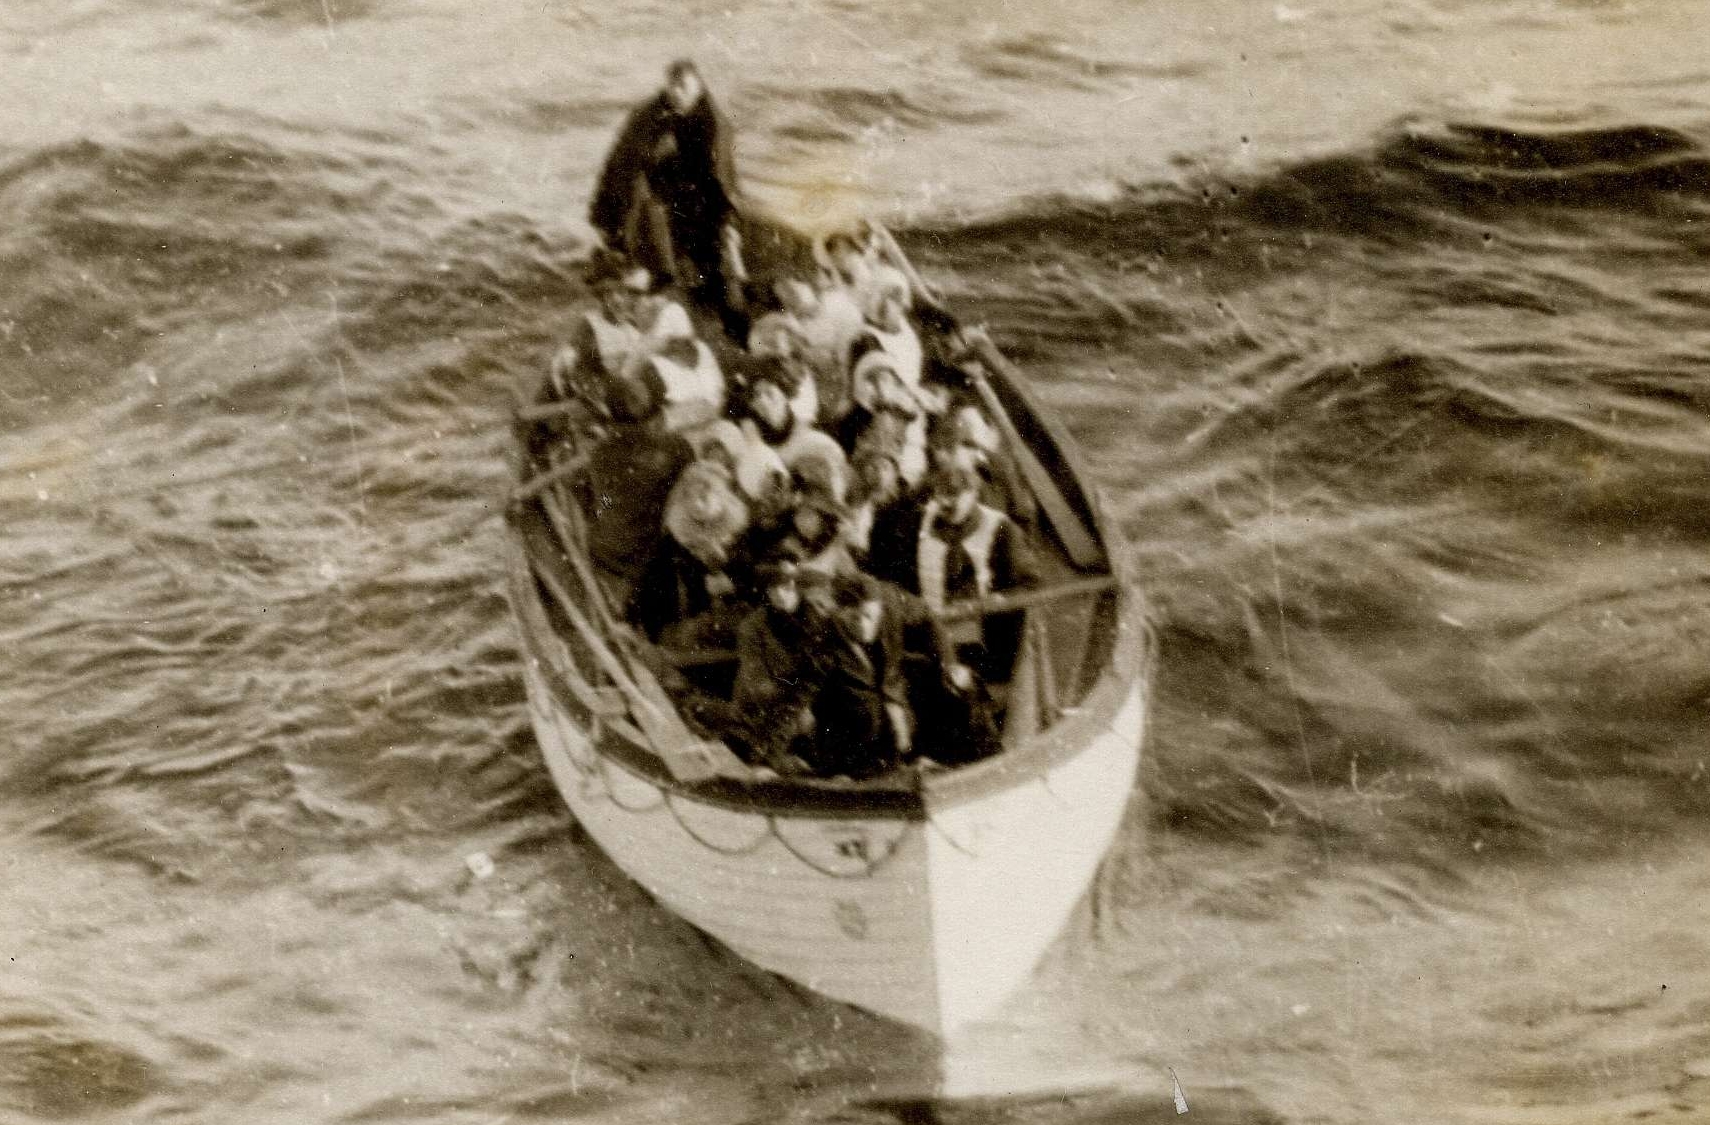 Lifeboat Carrying Titanic Survivors